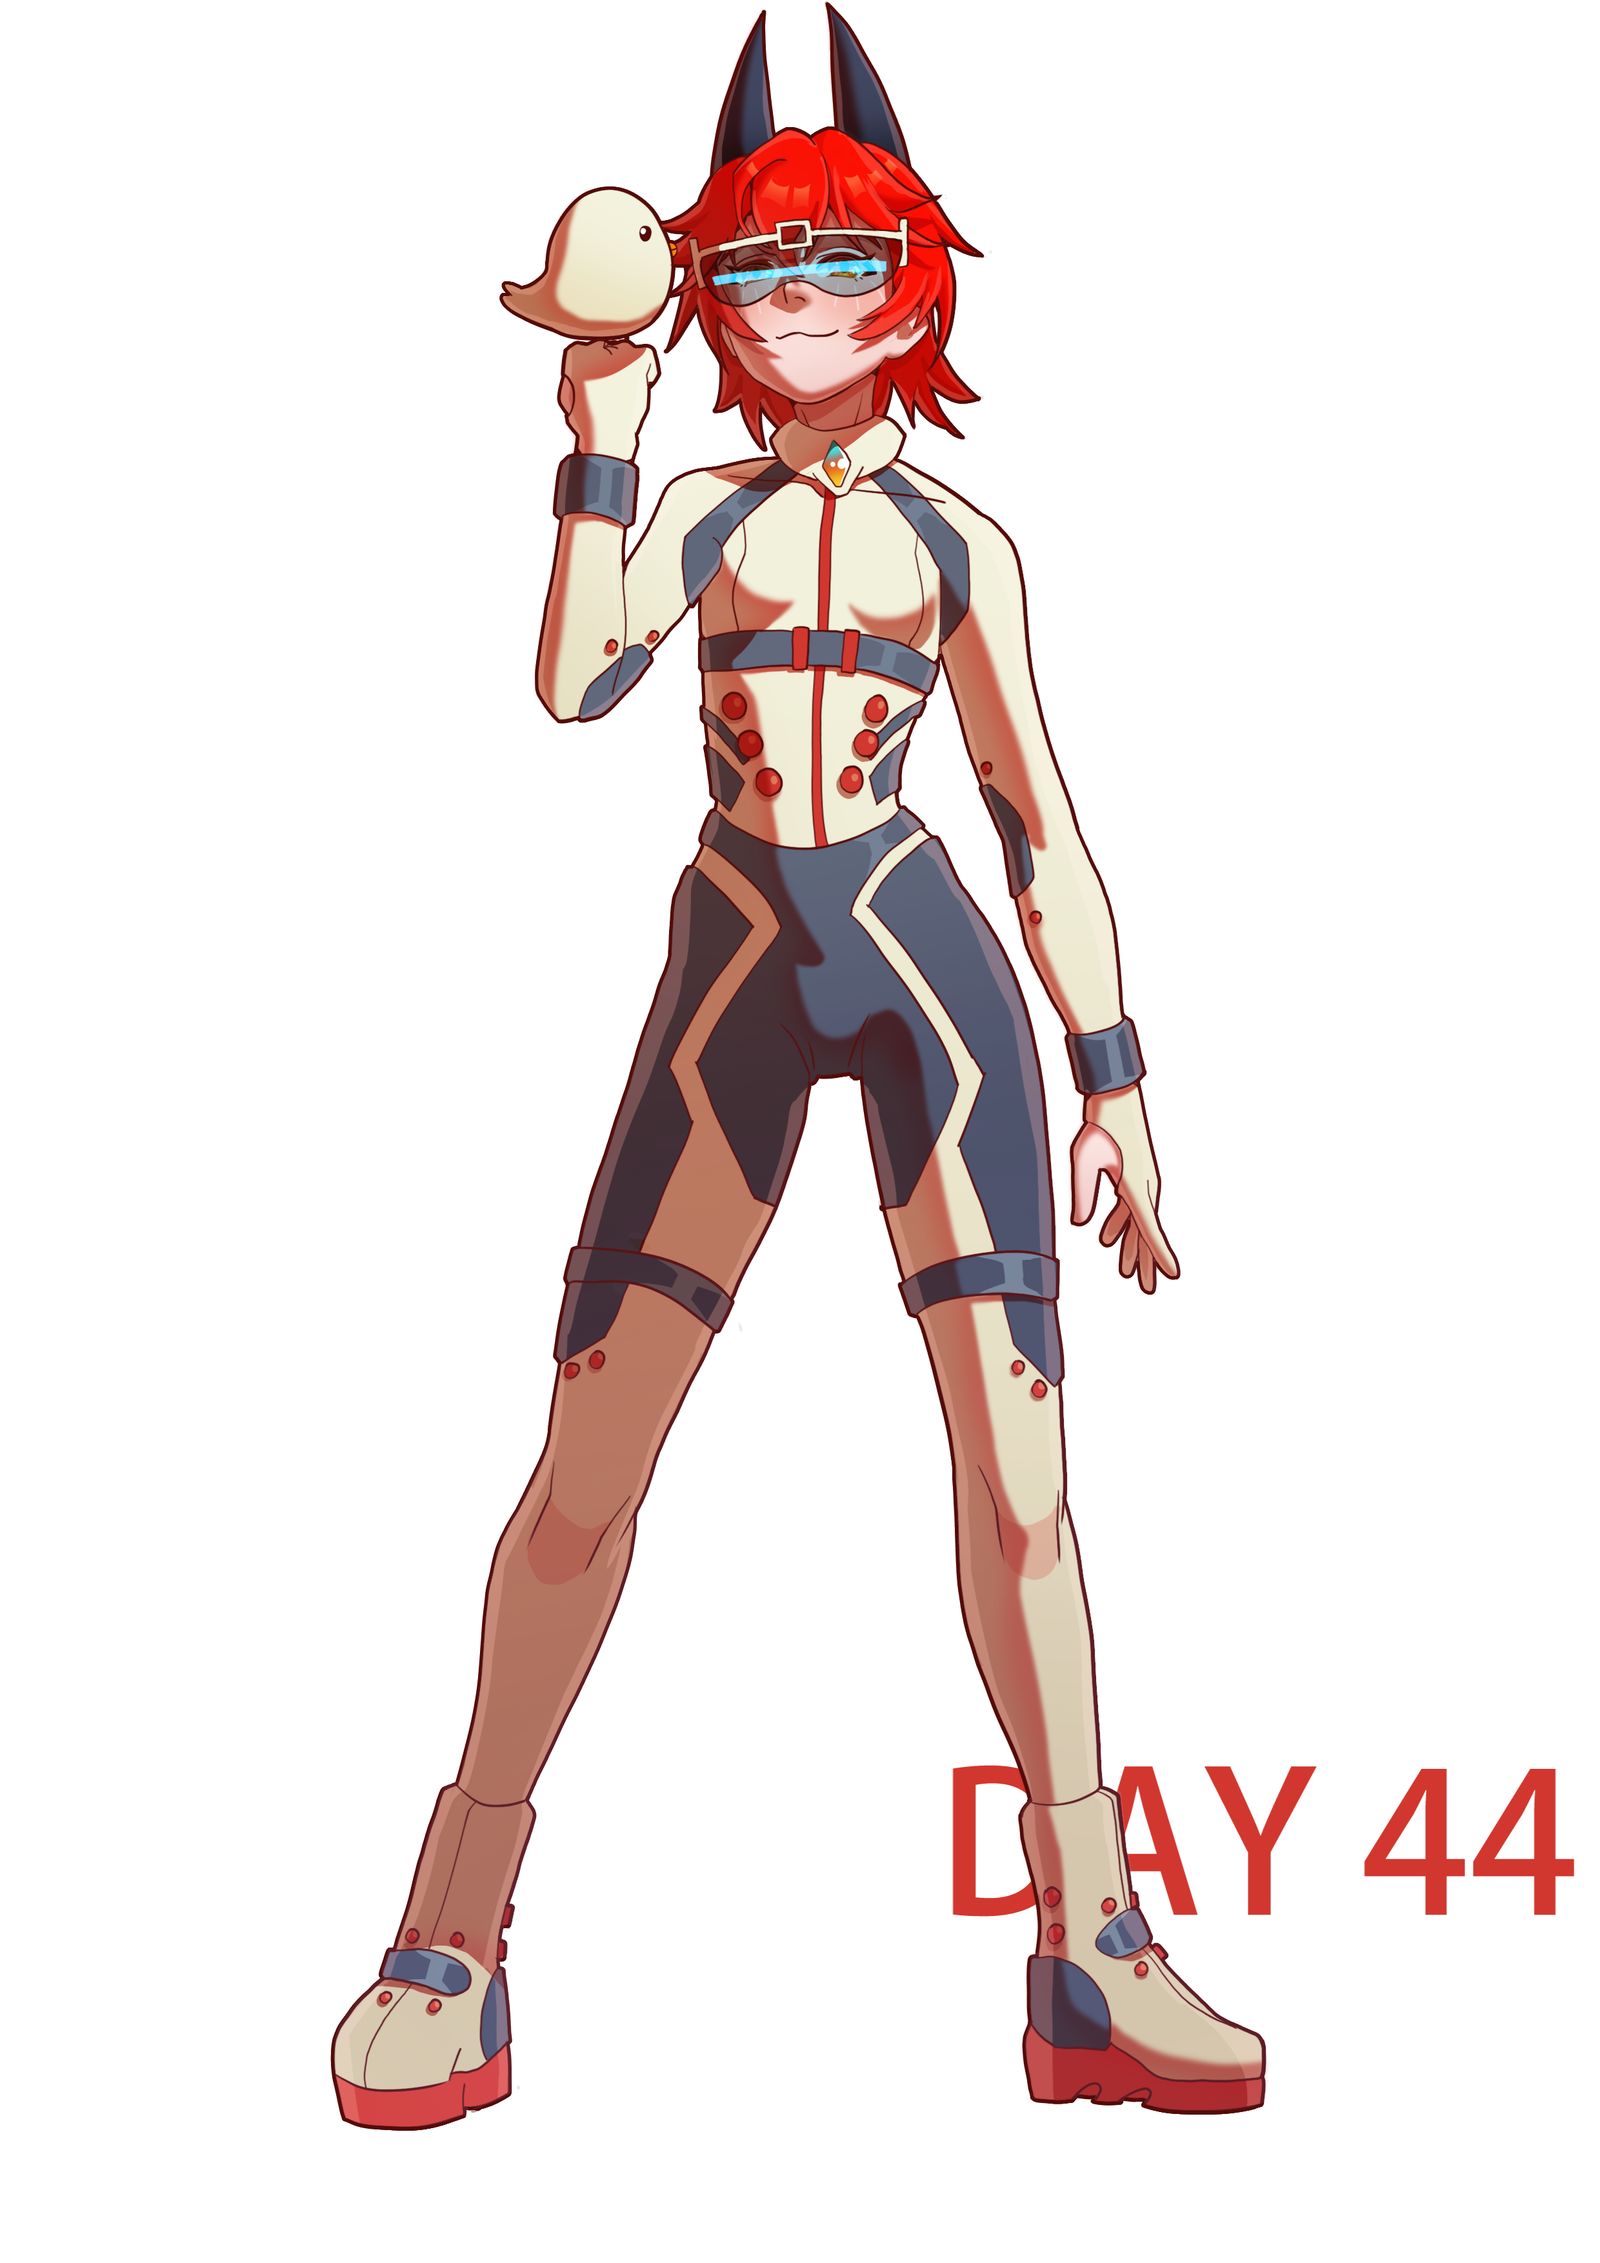 DAY44